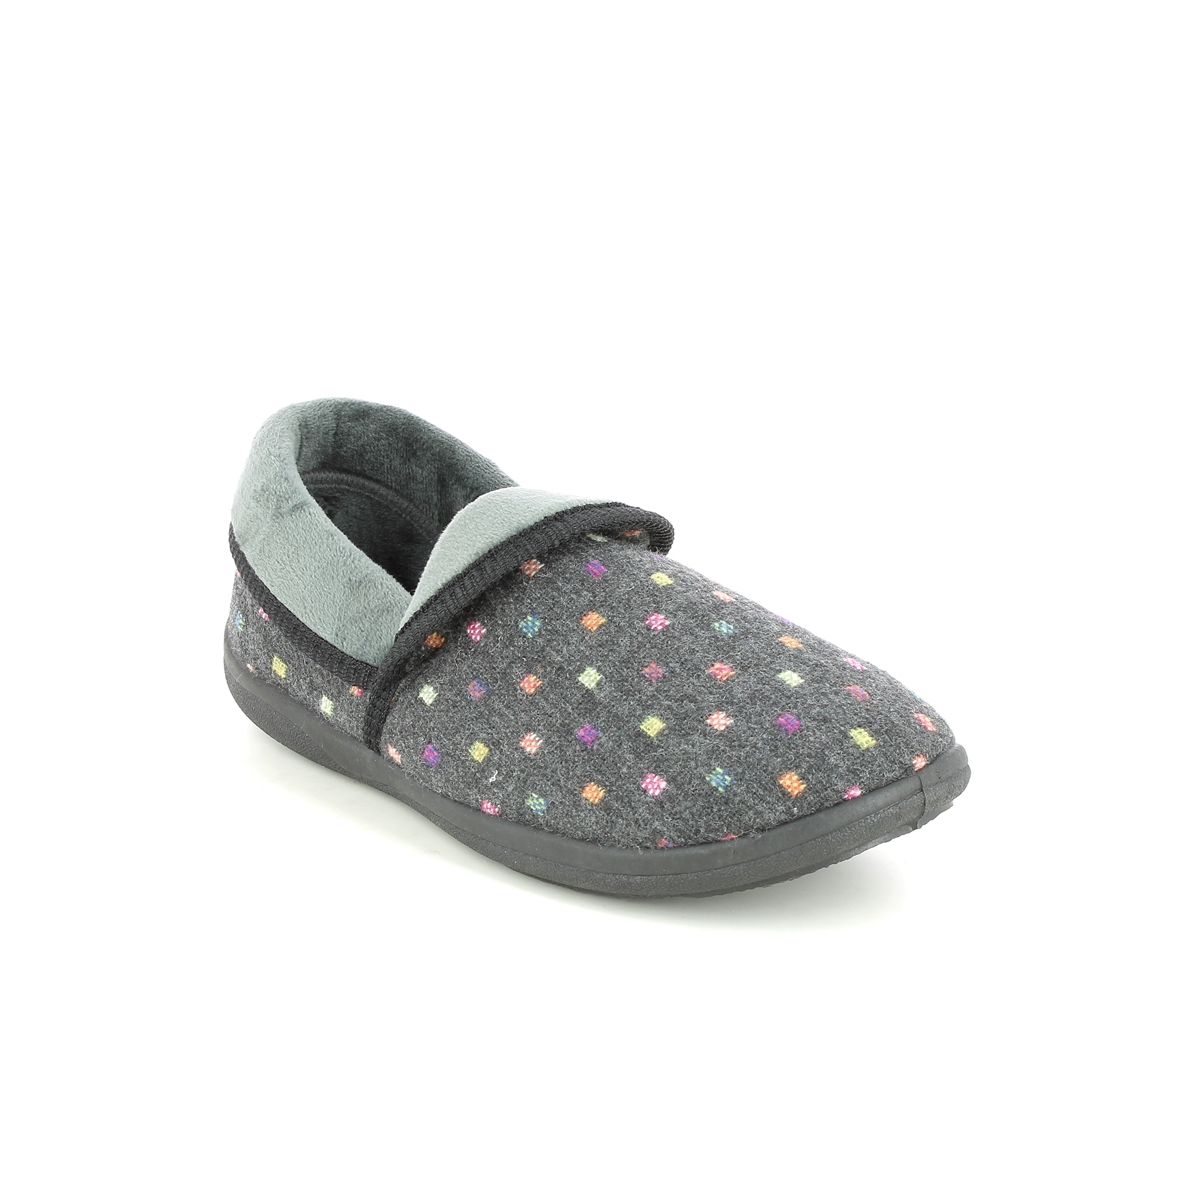 Padders Mellow Ee Fit Grey Womens slippers 460-1576 in a Plain Textile in Size 3